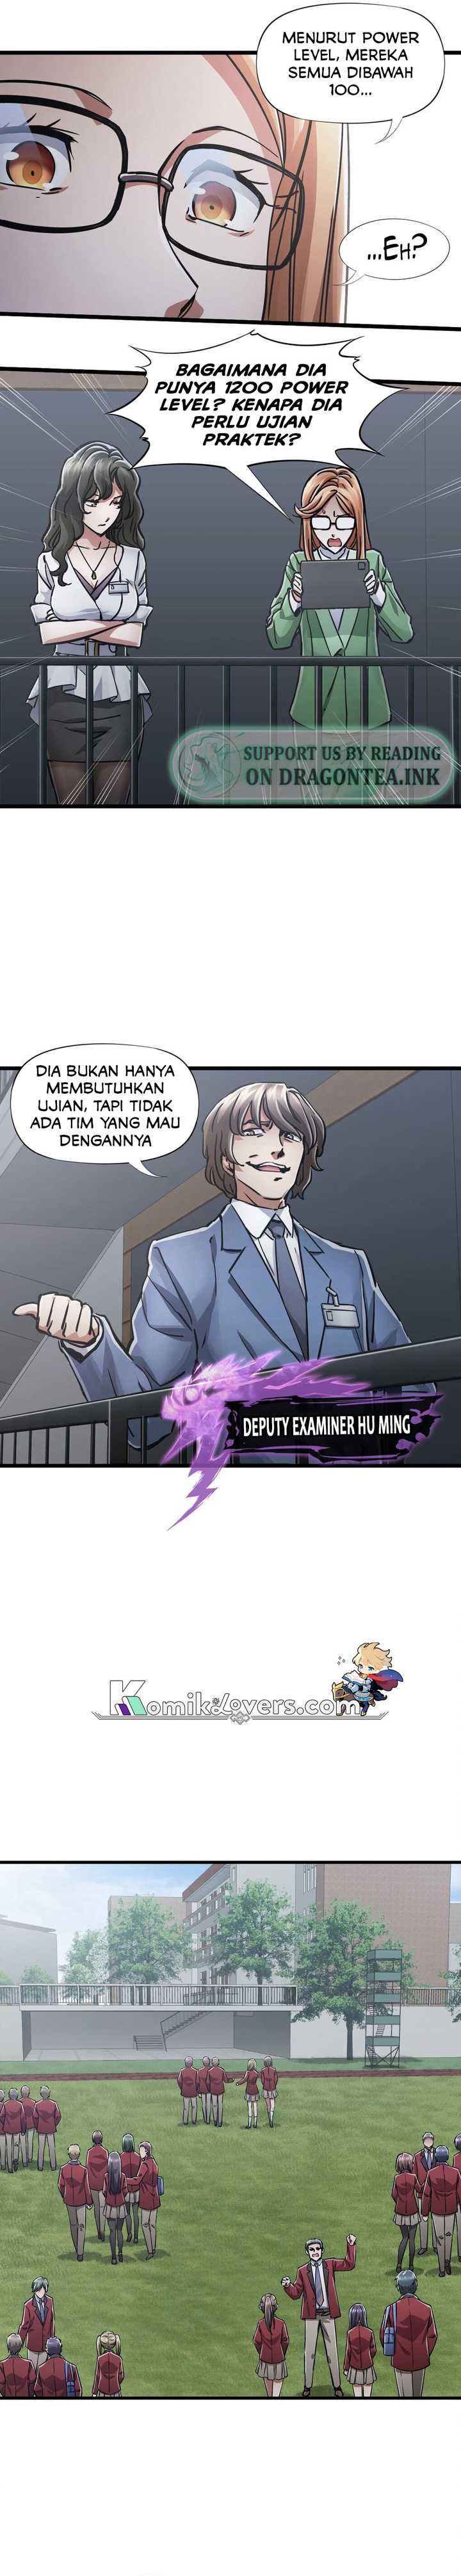 Divine Hand Chapter 01